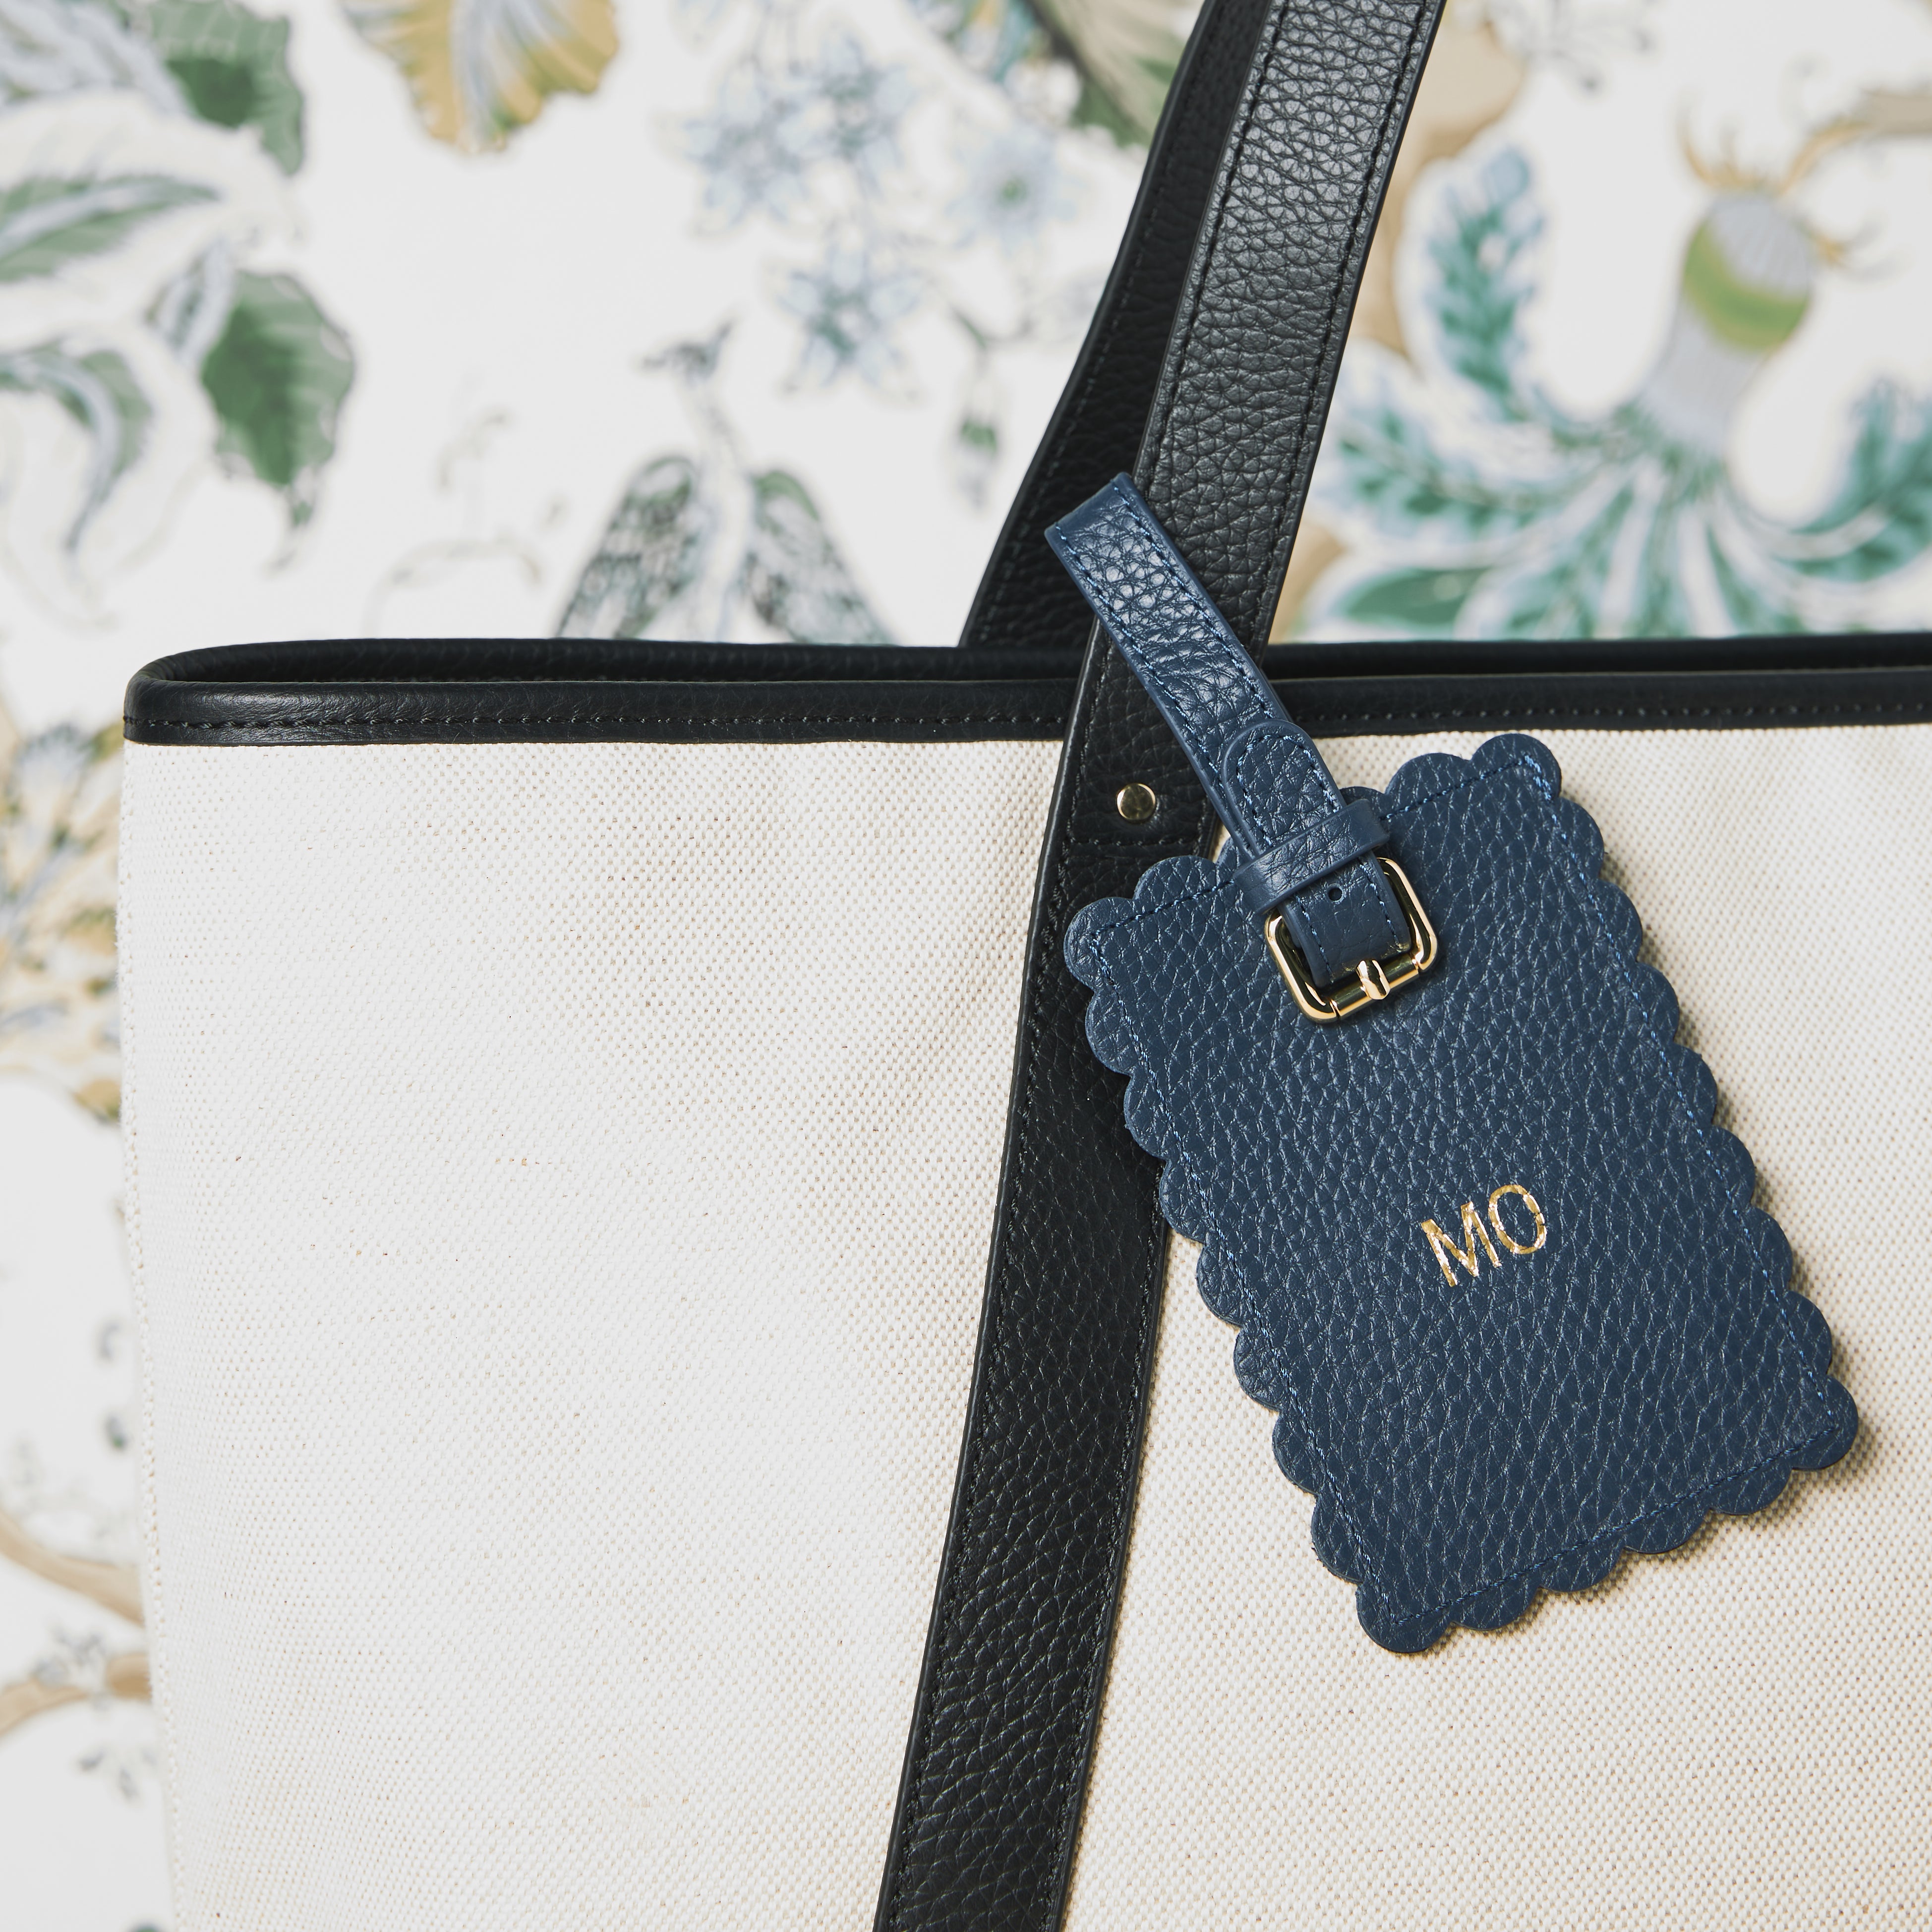 The Luggage Tag – Neely & Chloe